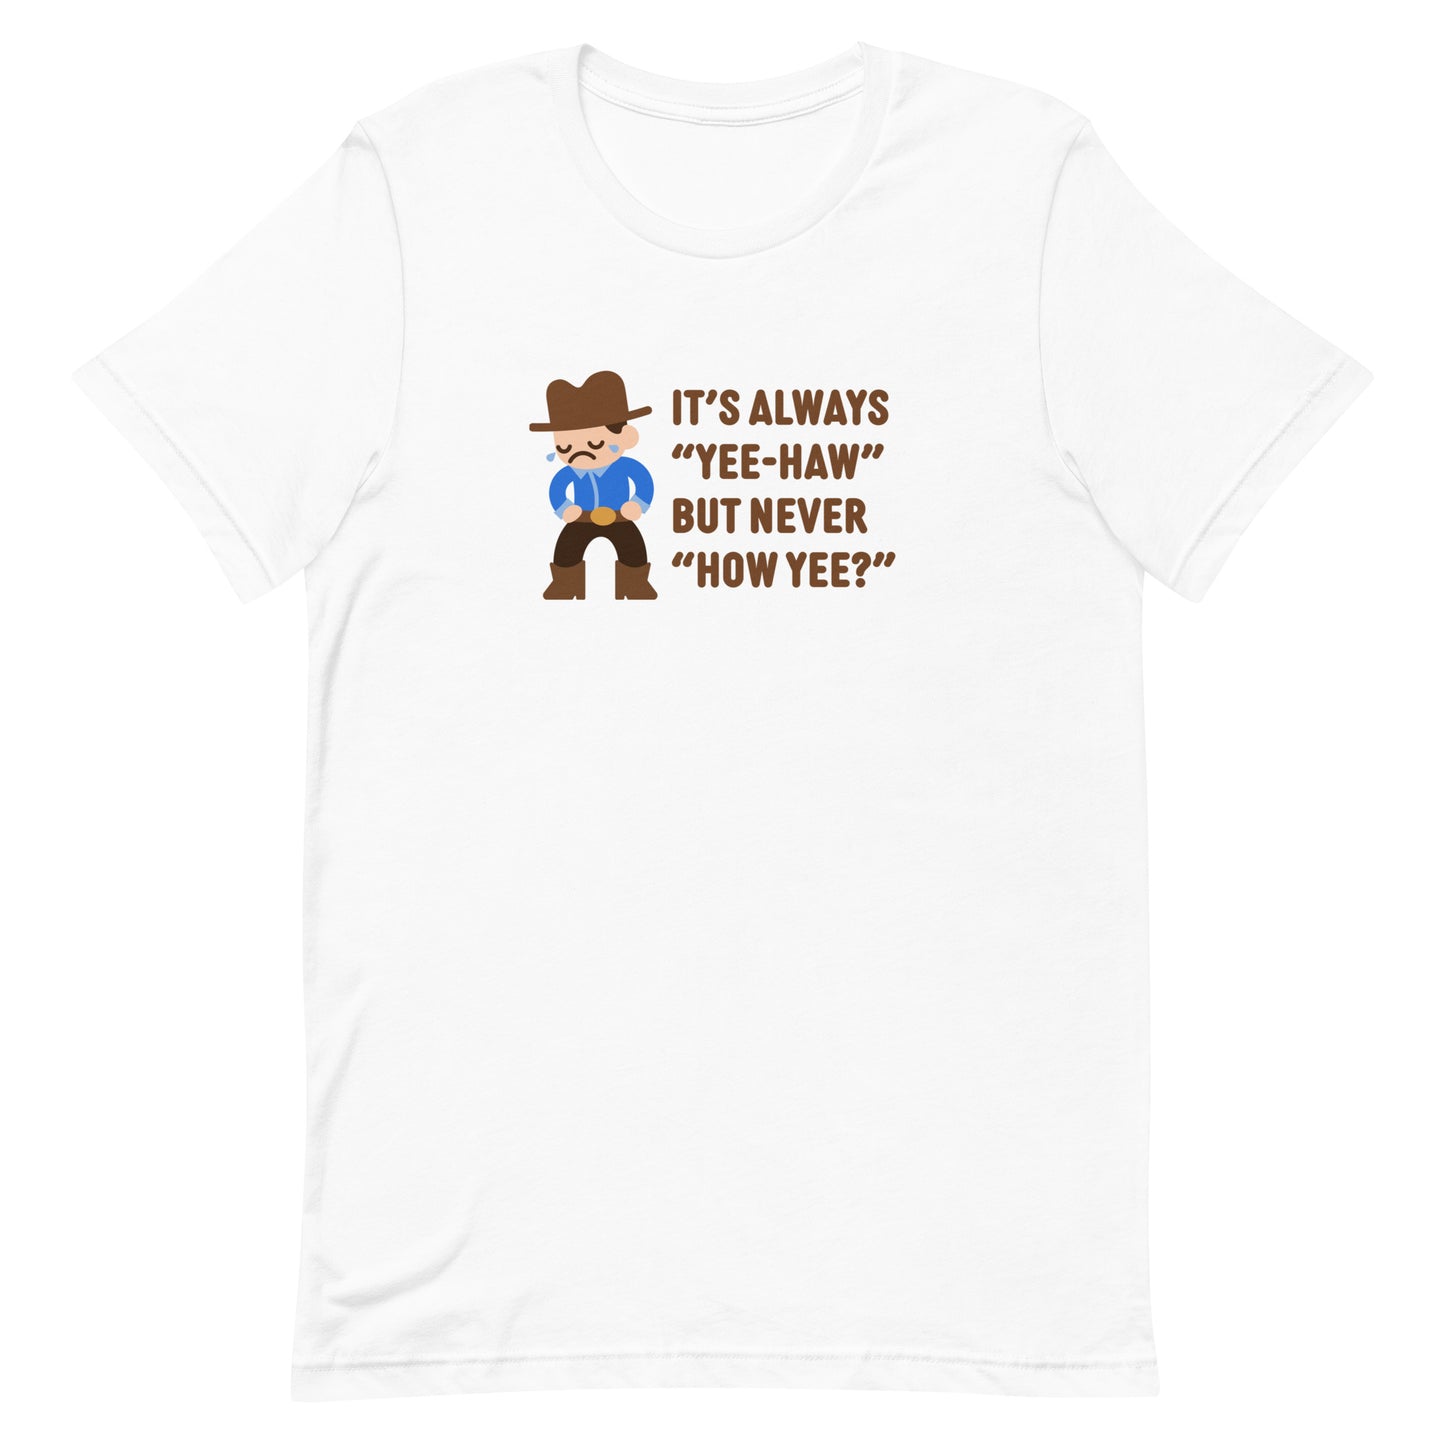 A white crewneck t-shirt featuring an illustration of a crying cowboy wearing a blue shirt. Text alongside the cowboy reads "It's always "yee-haw" but never "How yee?""